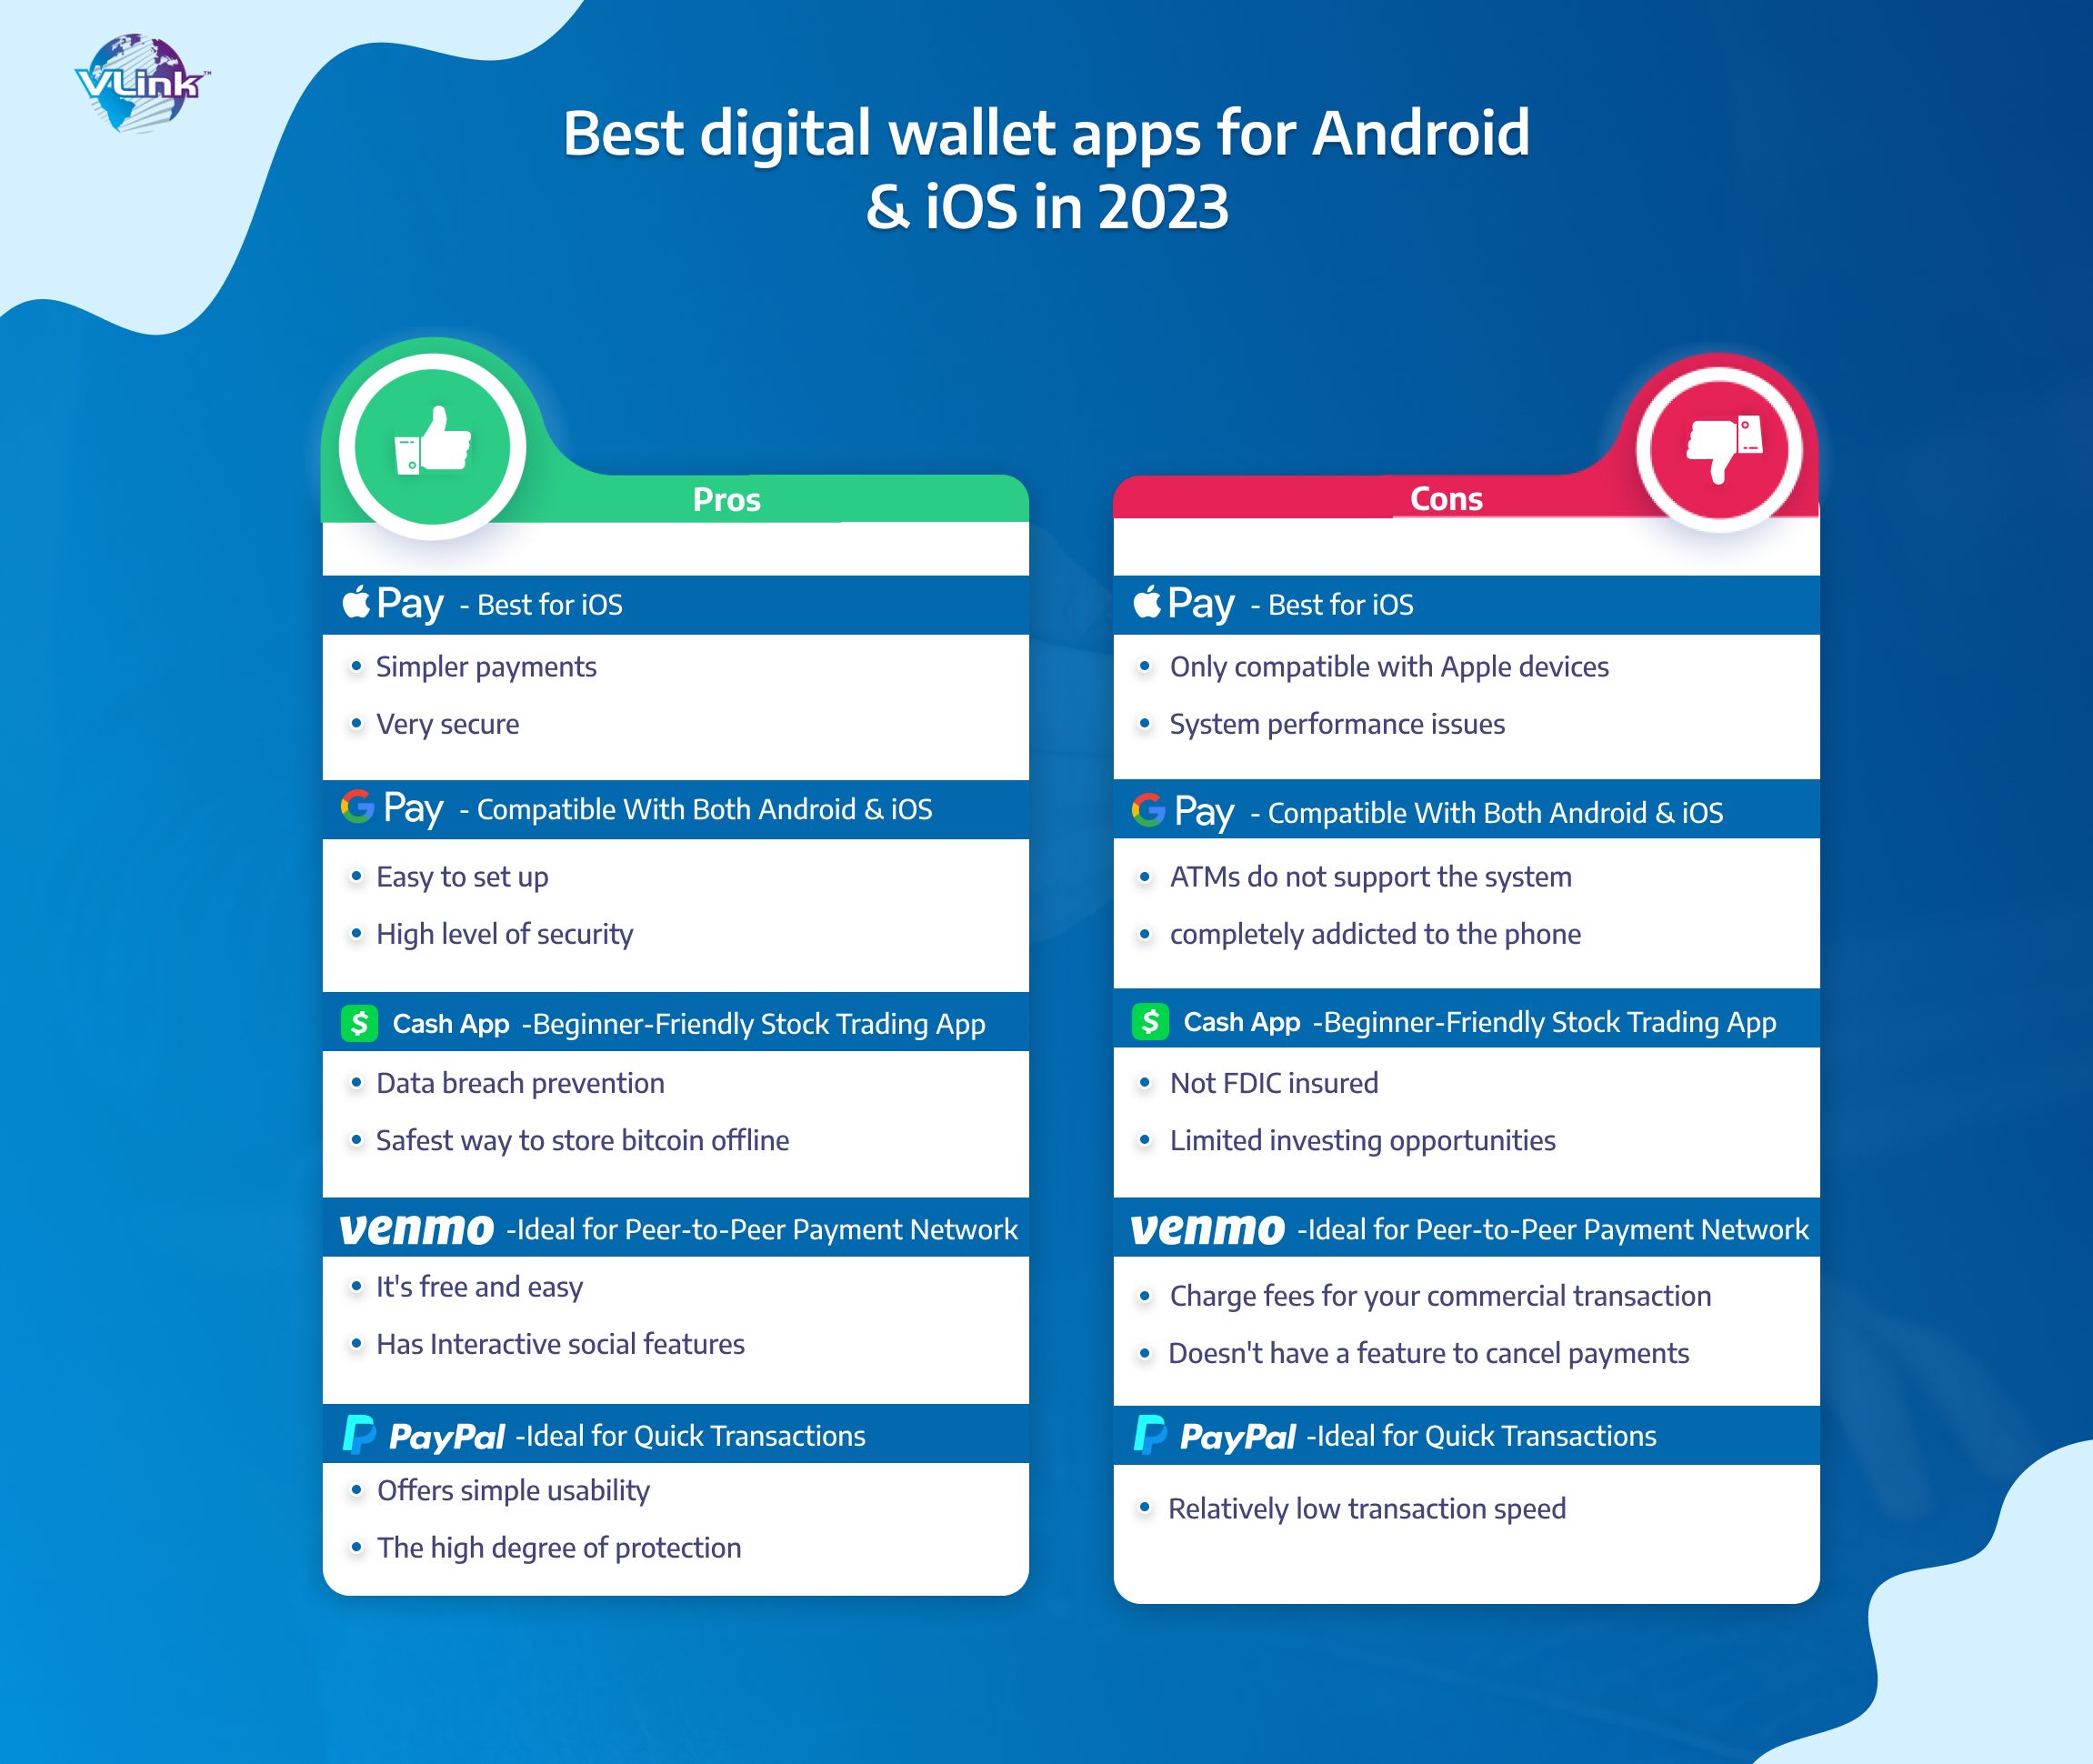 best digital wallet apps for android & IOS in 2023